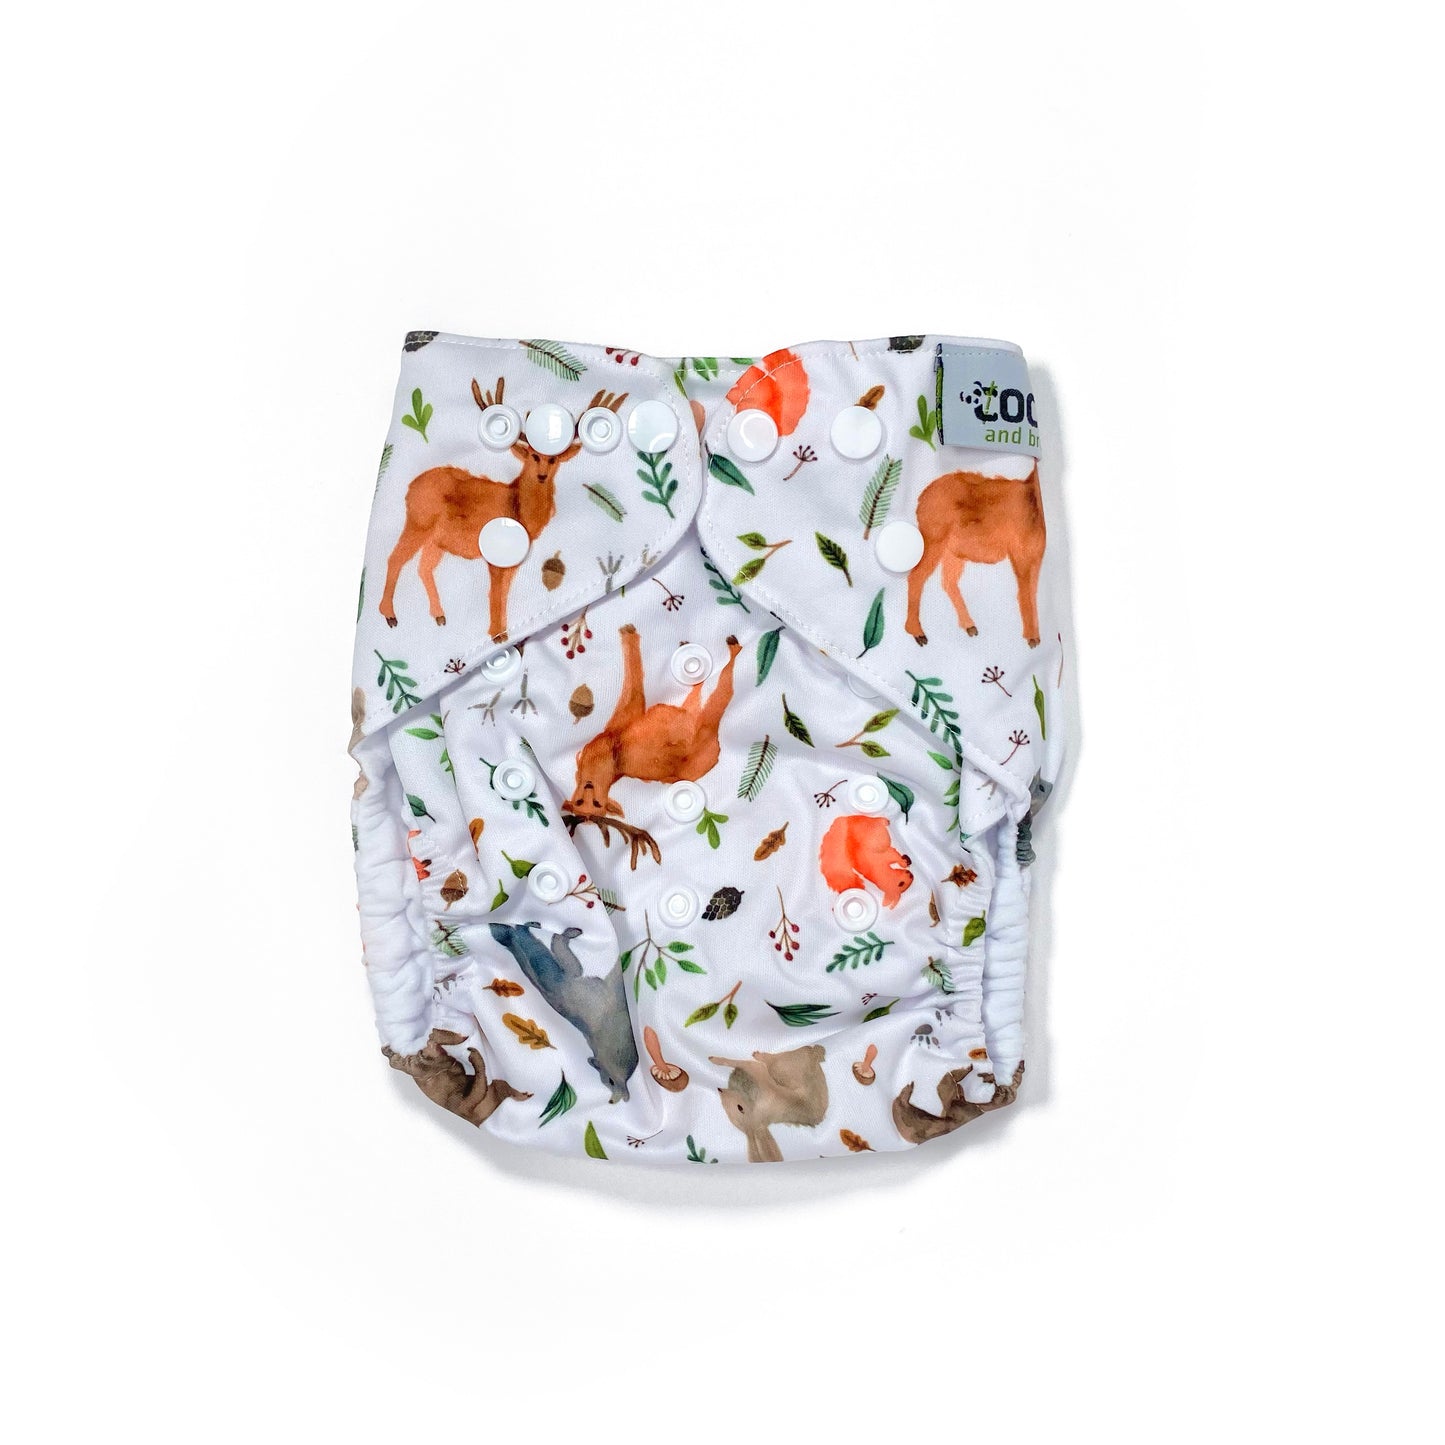 An adjustable reusable nappy for babies and toddlers, featuring a woodland animal design, with images of various woodland animals on a white background. View shows the front of the nappy, with fastenings closed.